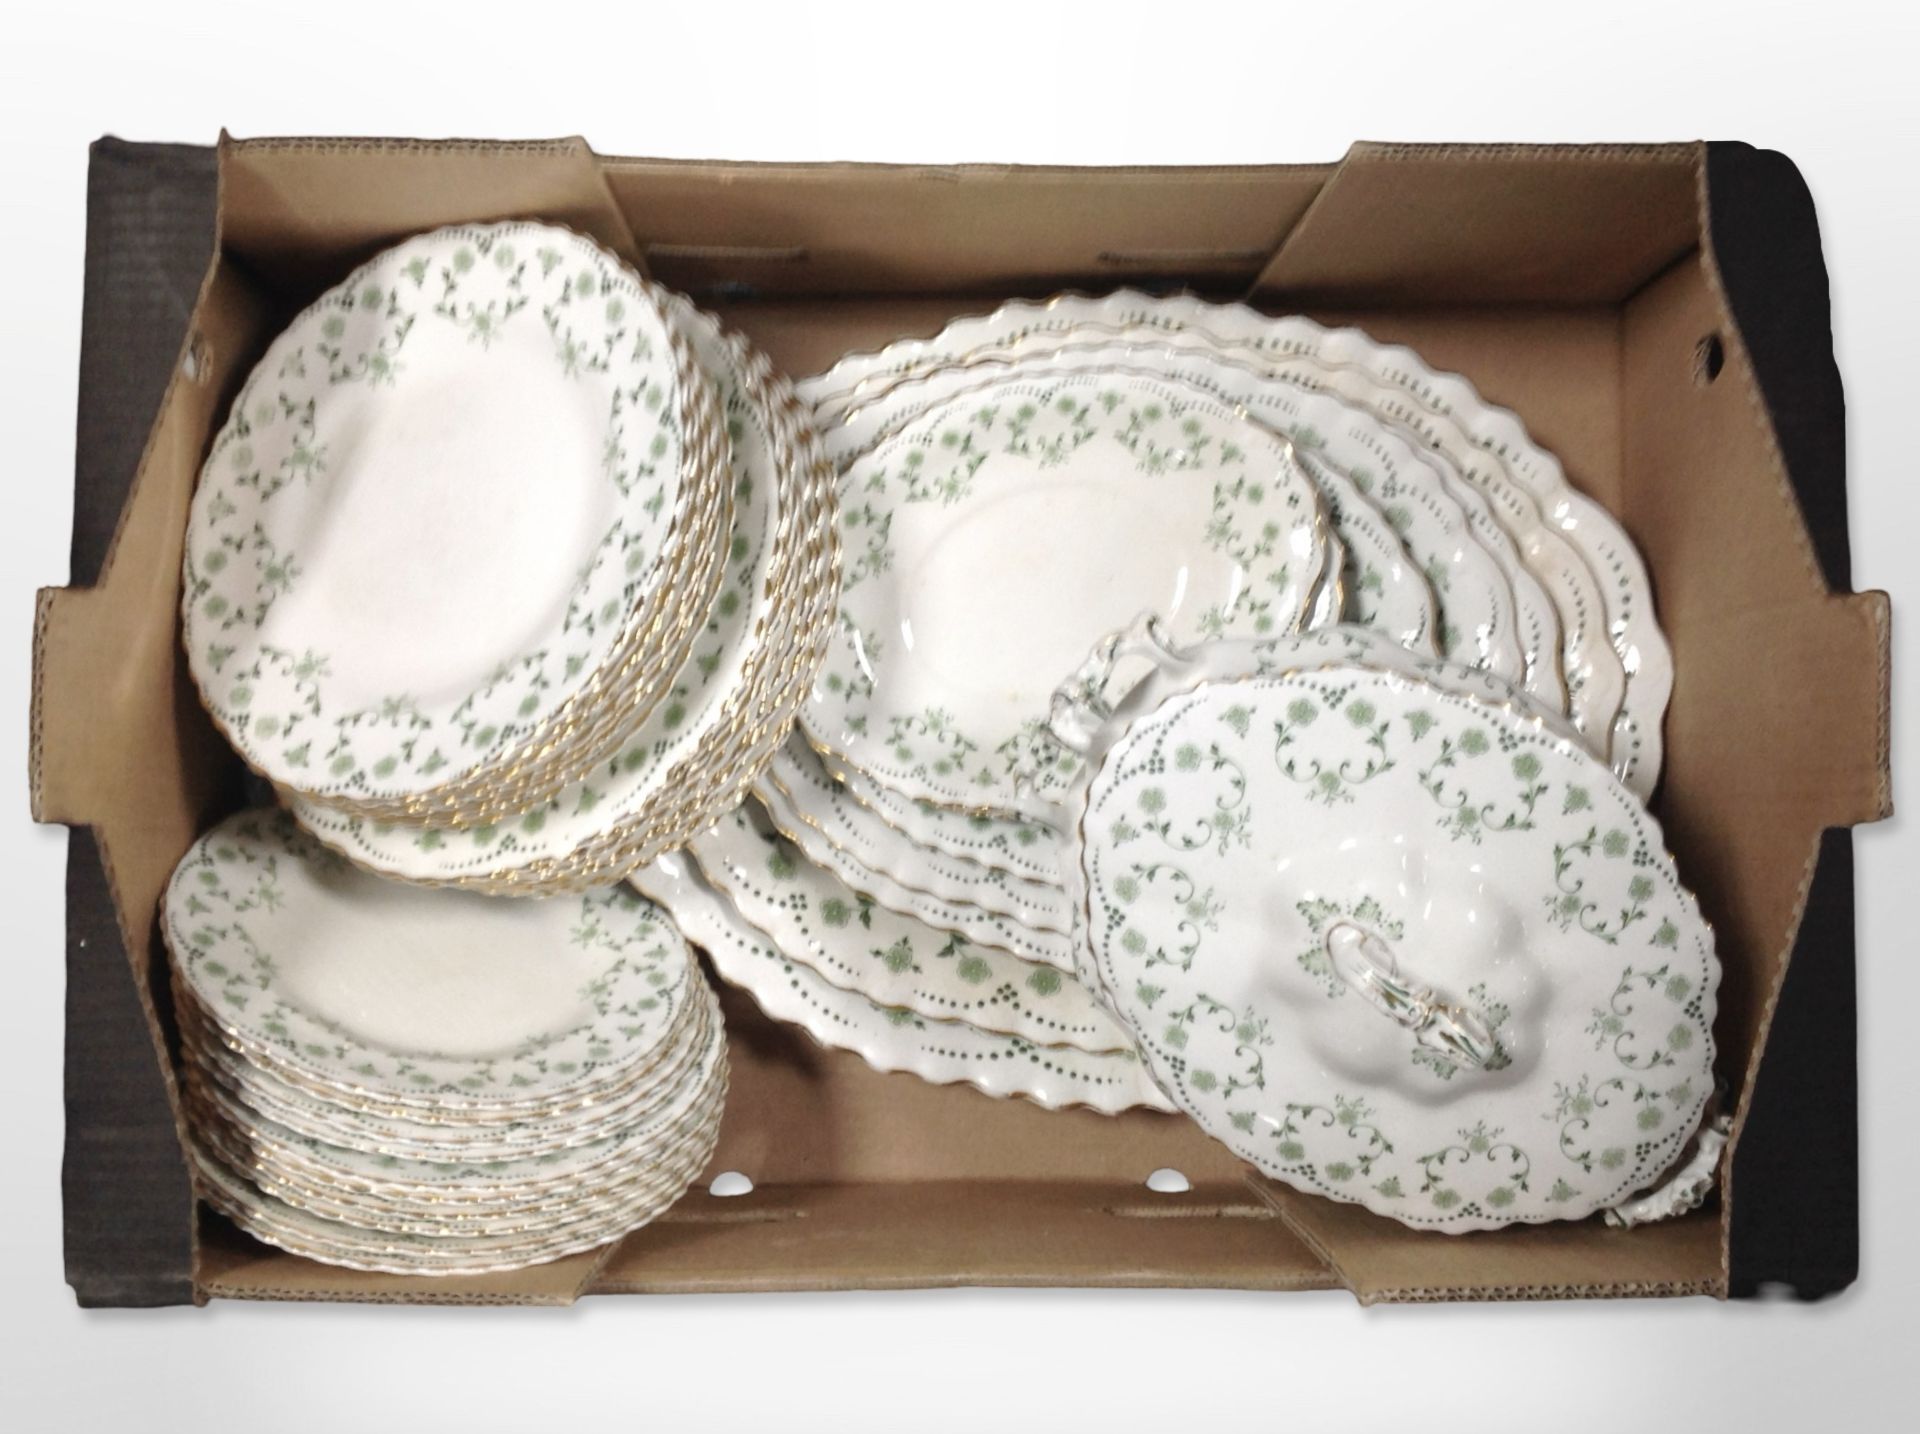 A collection of W H Gaindley and Co. berlin patterned dinner wares.